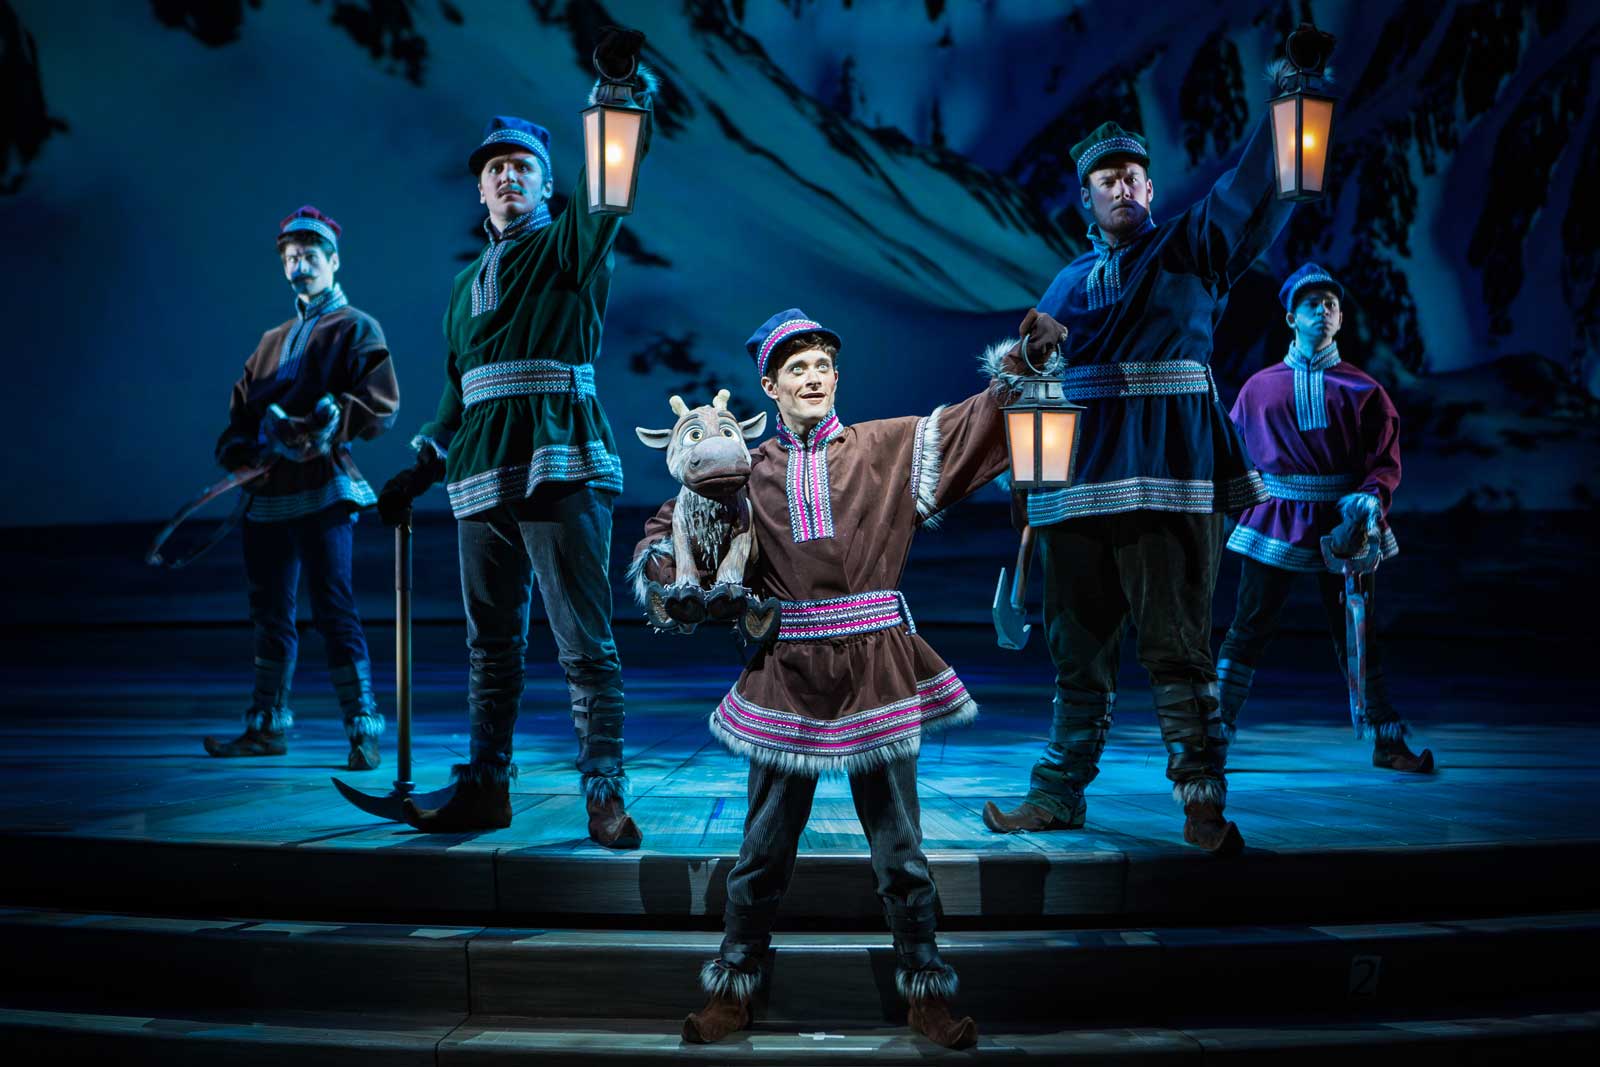 YOUNG KRISTOFF AND SVEN IN 'FROZEN - LIVE AT THE HYPERION' -- A new theatrical interpretation for the stage based on Disney's animated blockbuster film, Frozen is now playing at the Hyperion Theater at Disney California Adventure Park. The show immerses audiences in the emotional journey of Anna and Elsa with all of the excitement of live theater, including elaborate costumes and sets, stunning special effects and show-stopping production numbers. (Piotr A. Redlinski/Disneyland Resort)